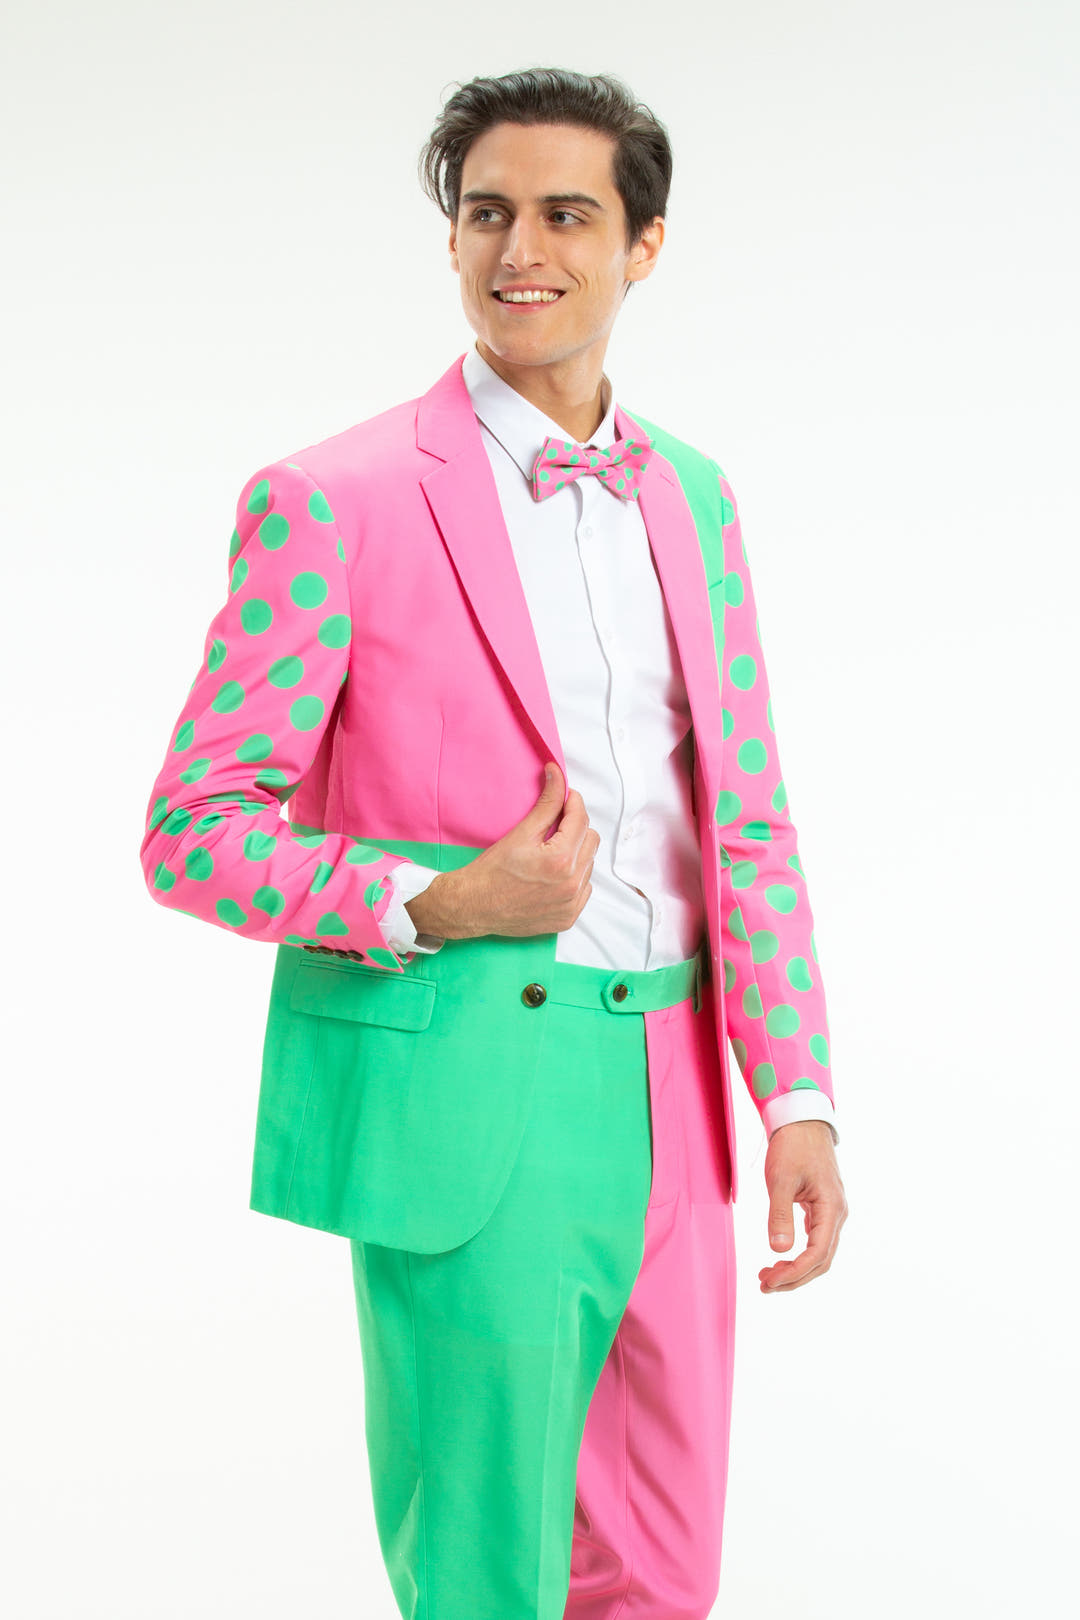 Derby Green And Pink Jockey Men's Suit | The High Stakes